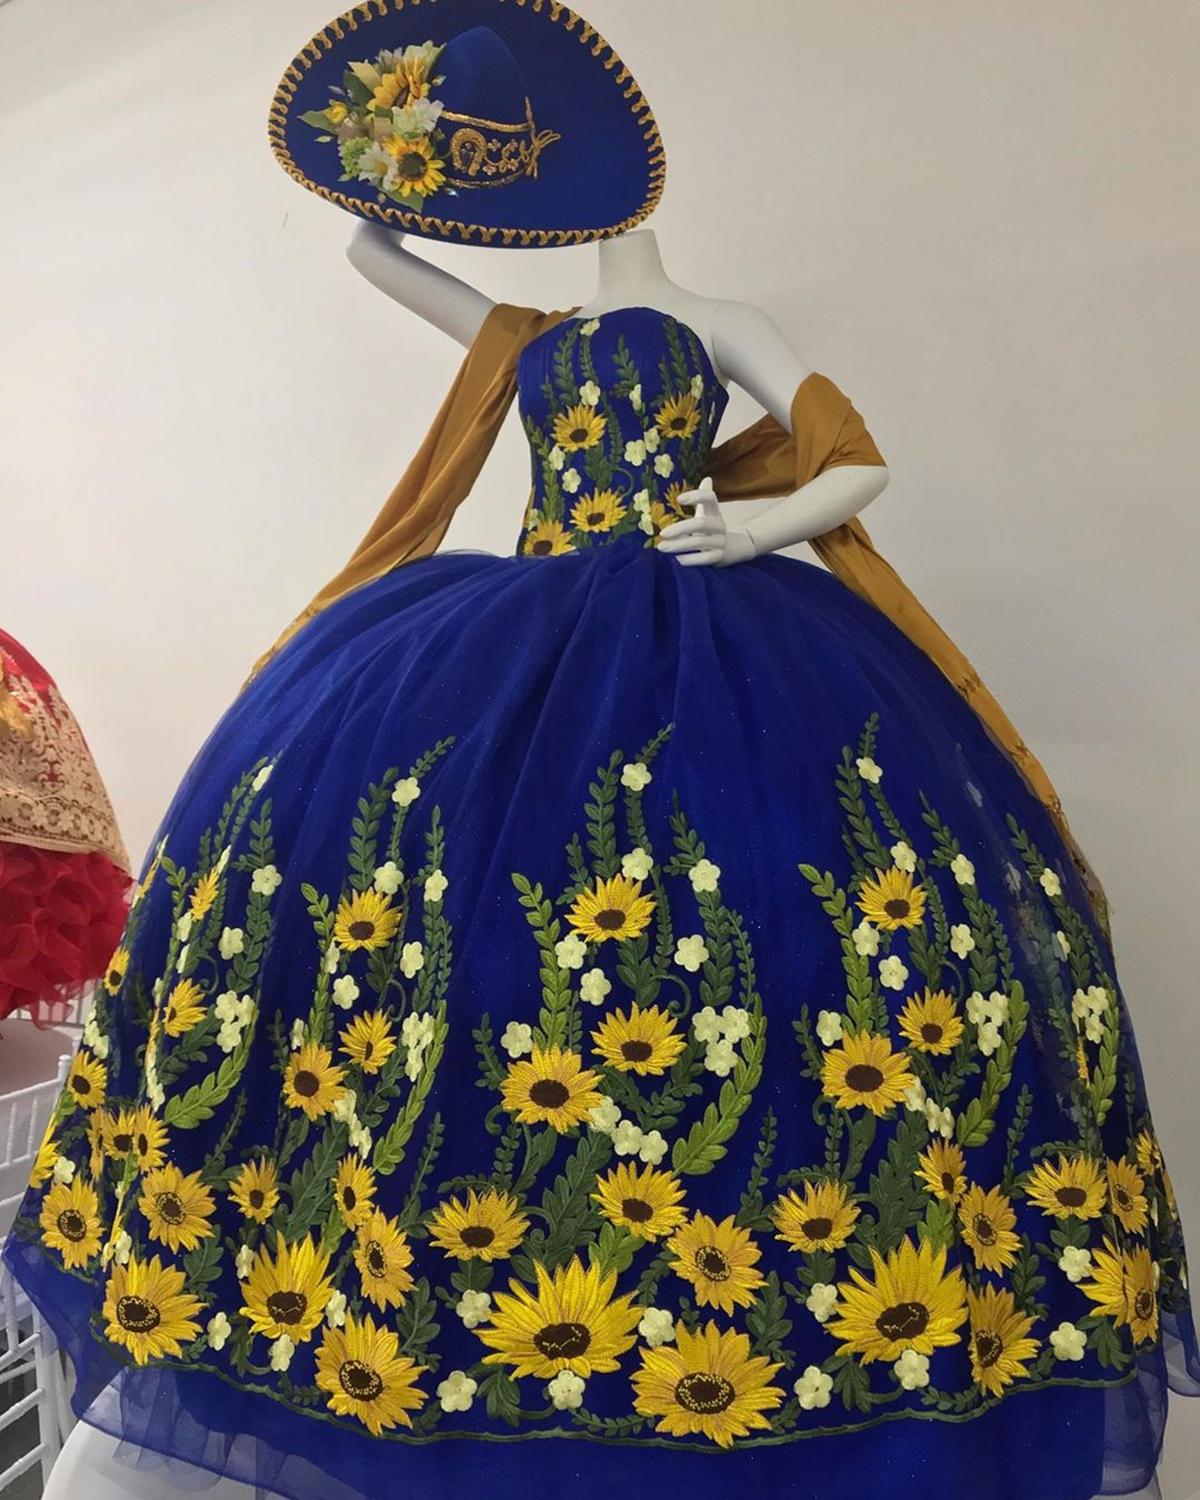 quinceanera dress from mexico buy online,quinceanera dress from mexico city,mexico themed quinceanera dress,sunflower quinceanera dress,floral embroidered quinceanera dress,quinceanera dress western theme,